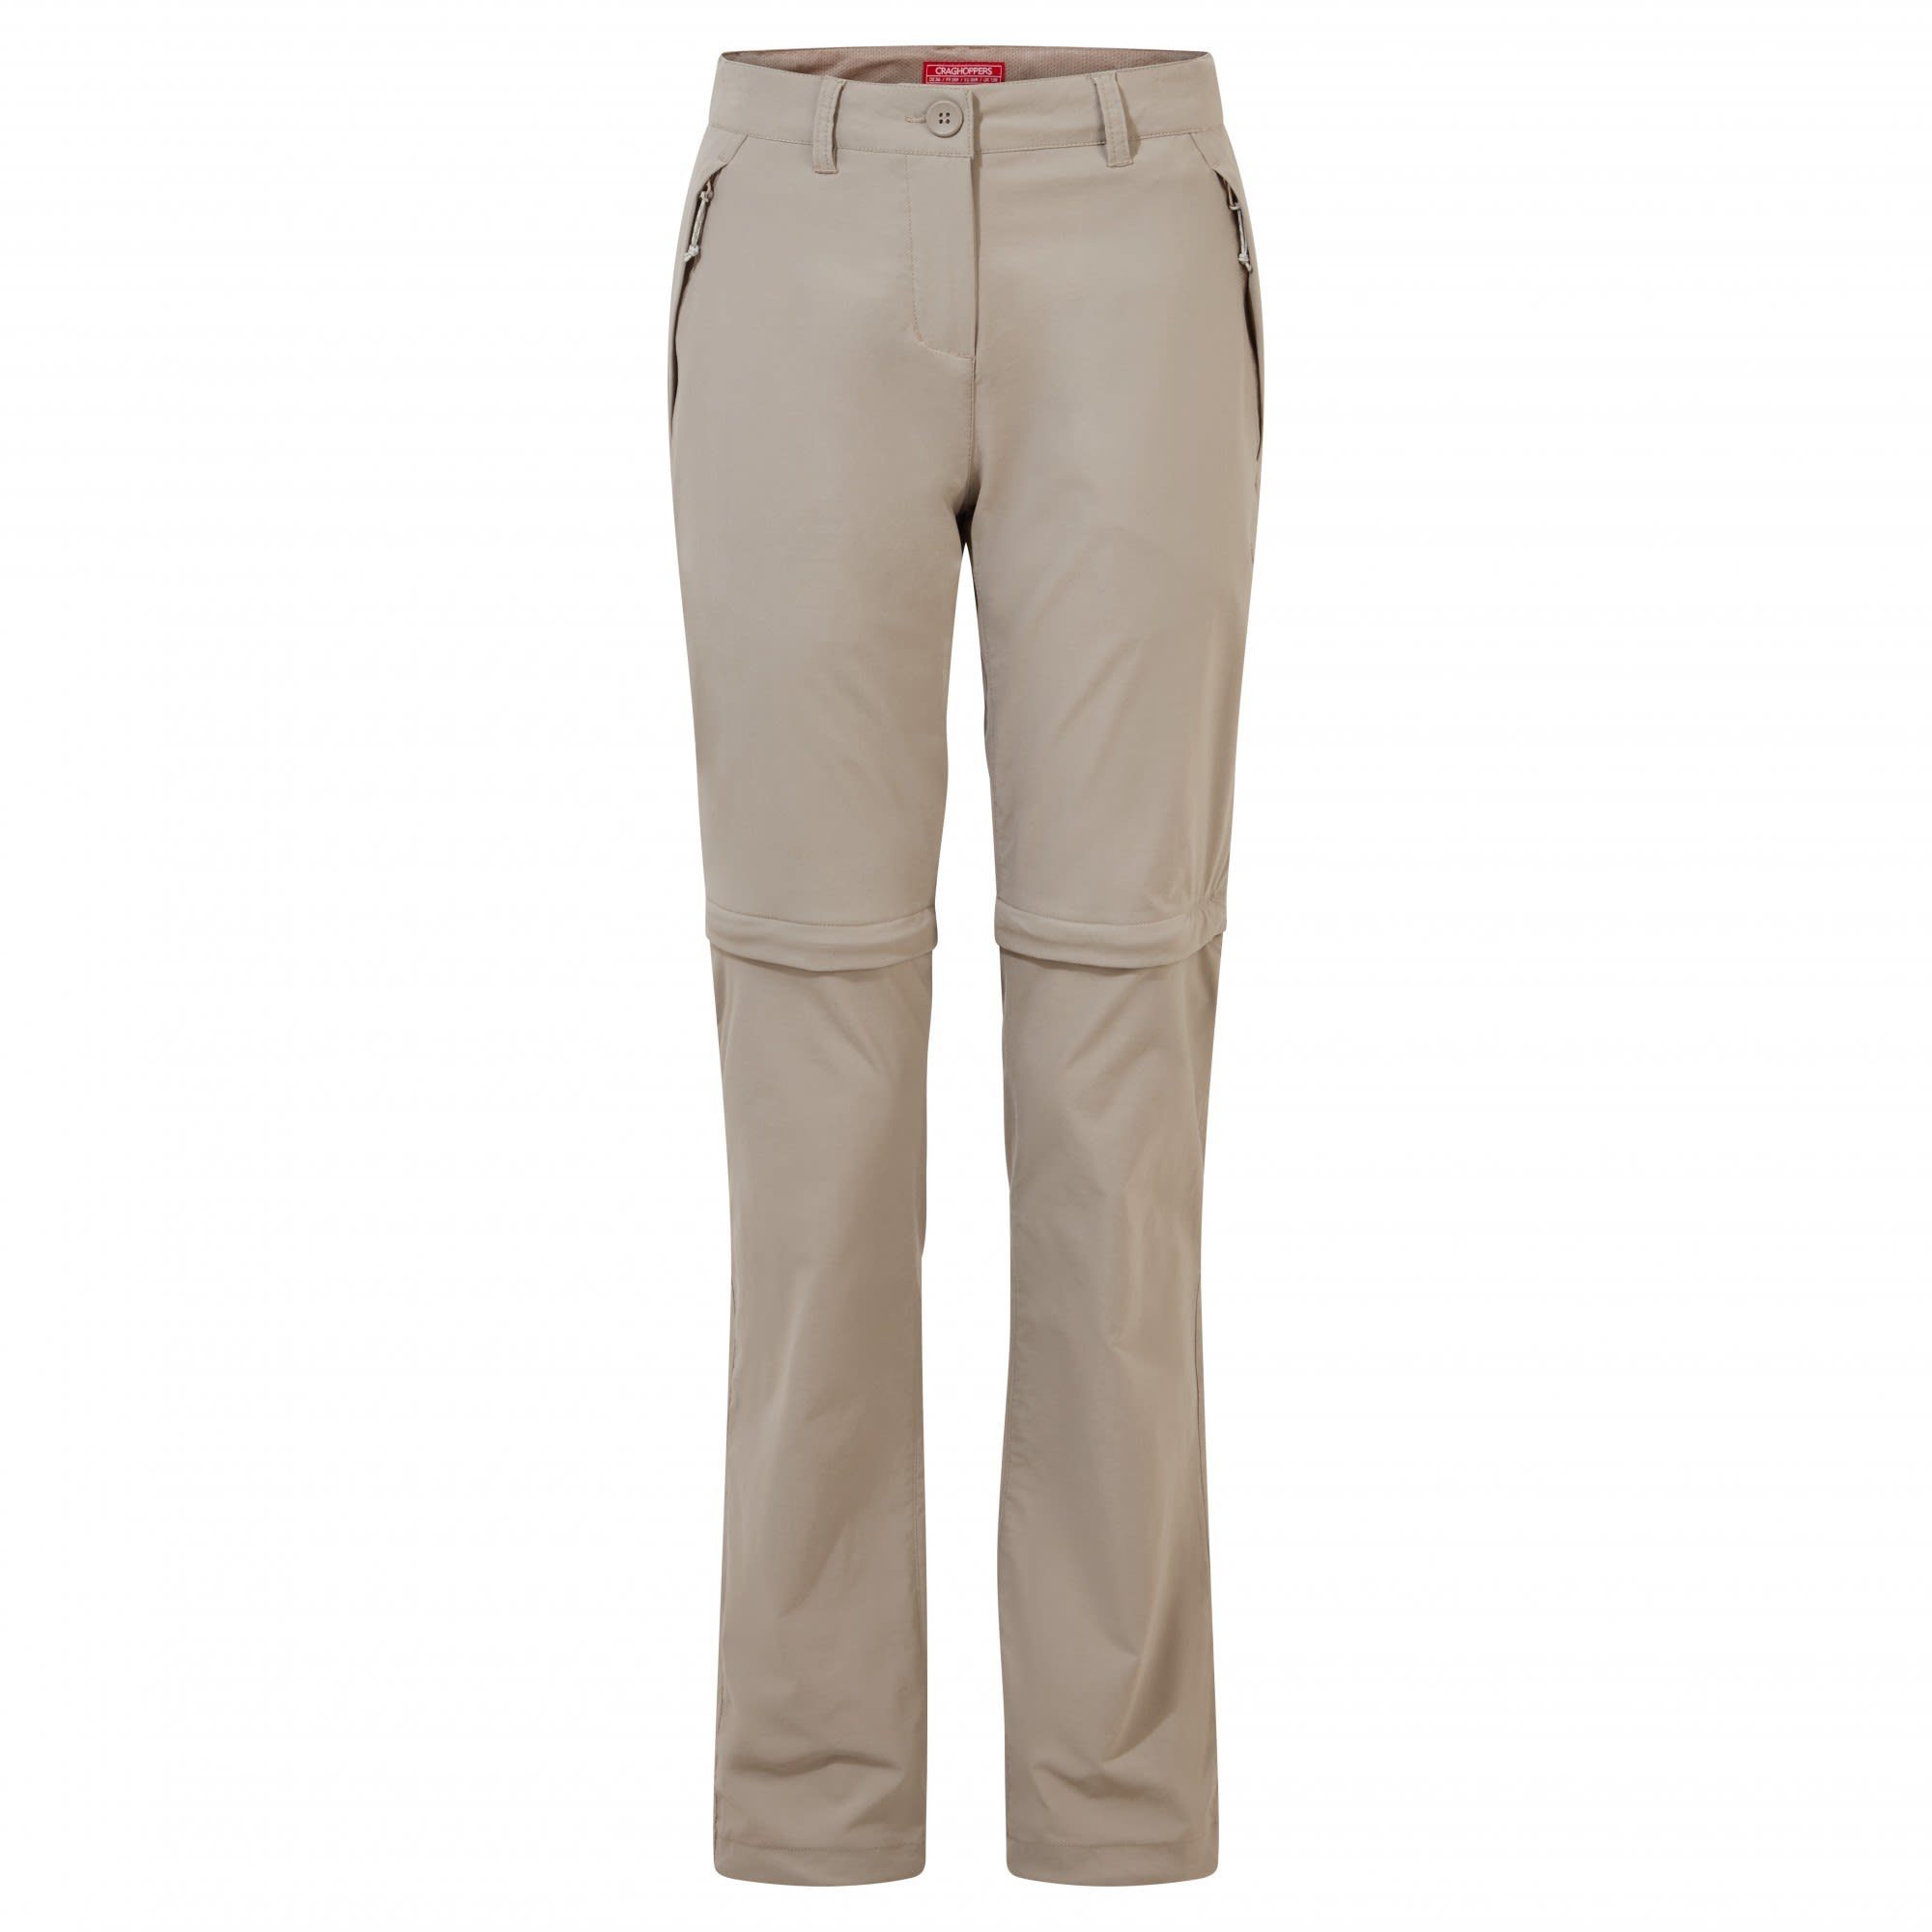 Craghoppers Zip-off-Hose Craghoppers W Nosilife Pro Convertible Trousers | Zip-off-Hosen